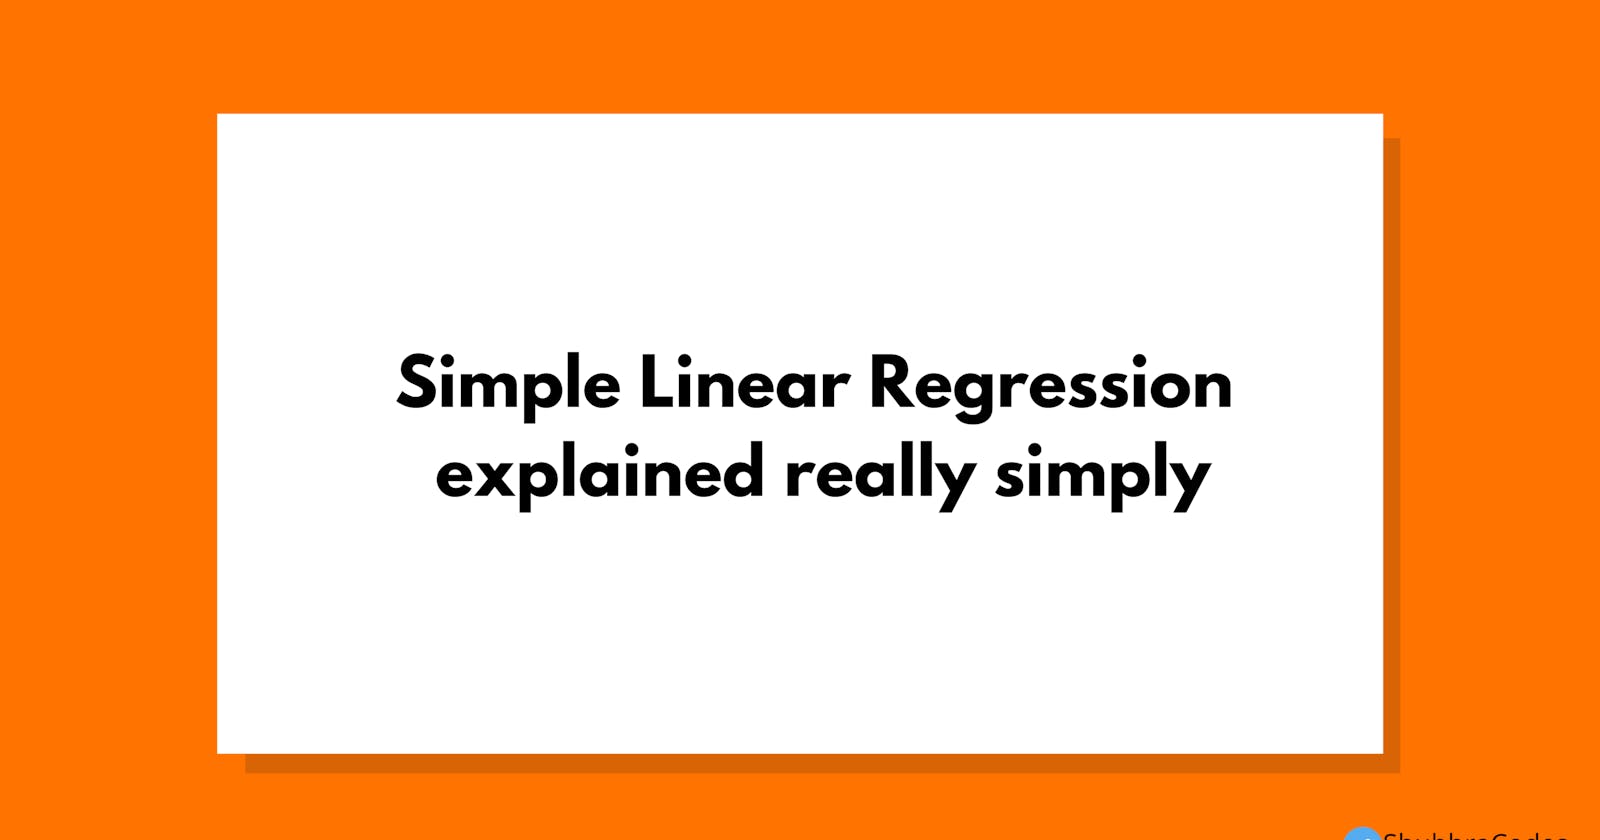 Learn Simple Linear Regression simply